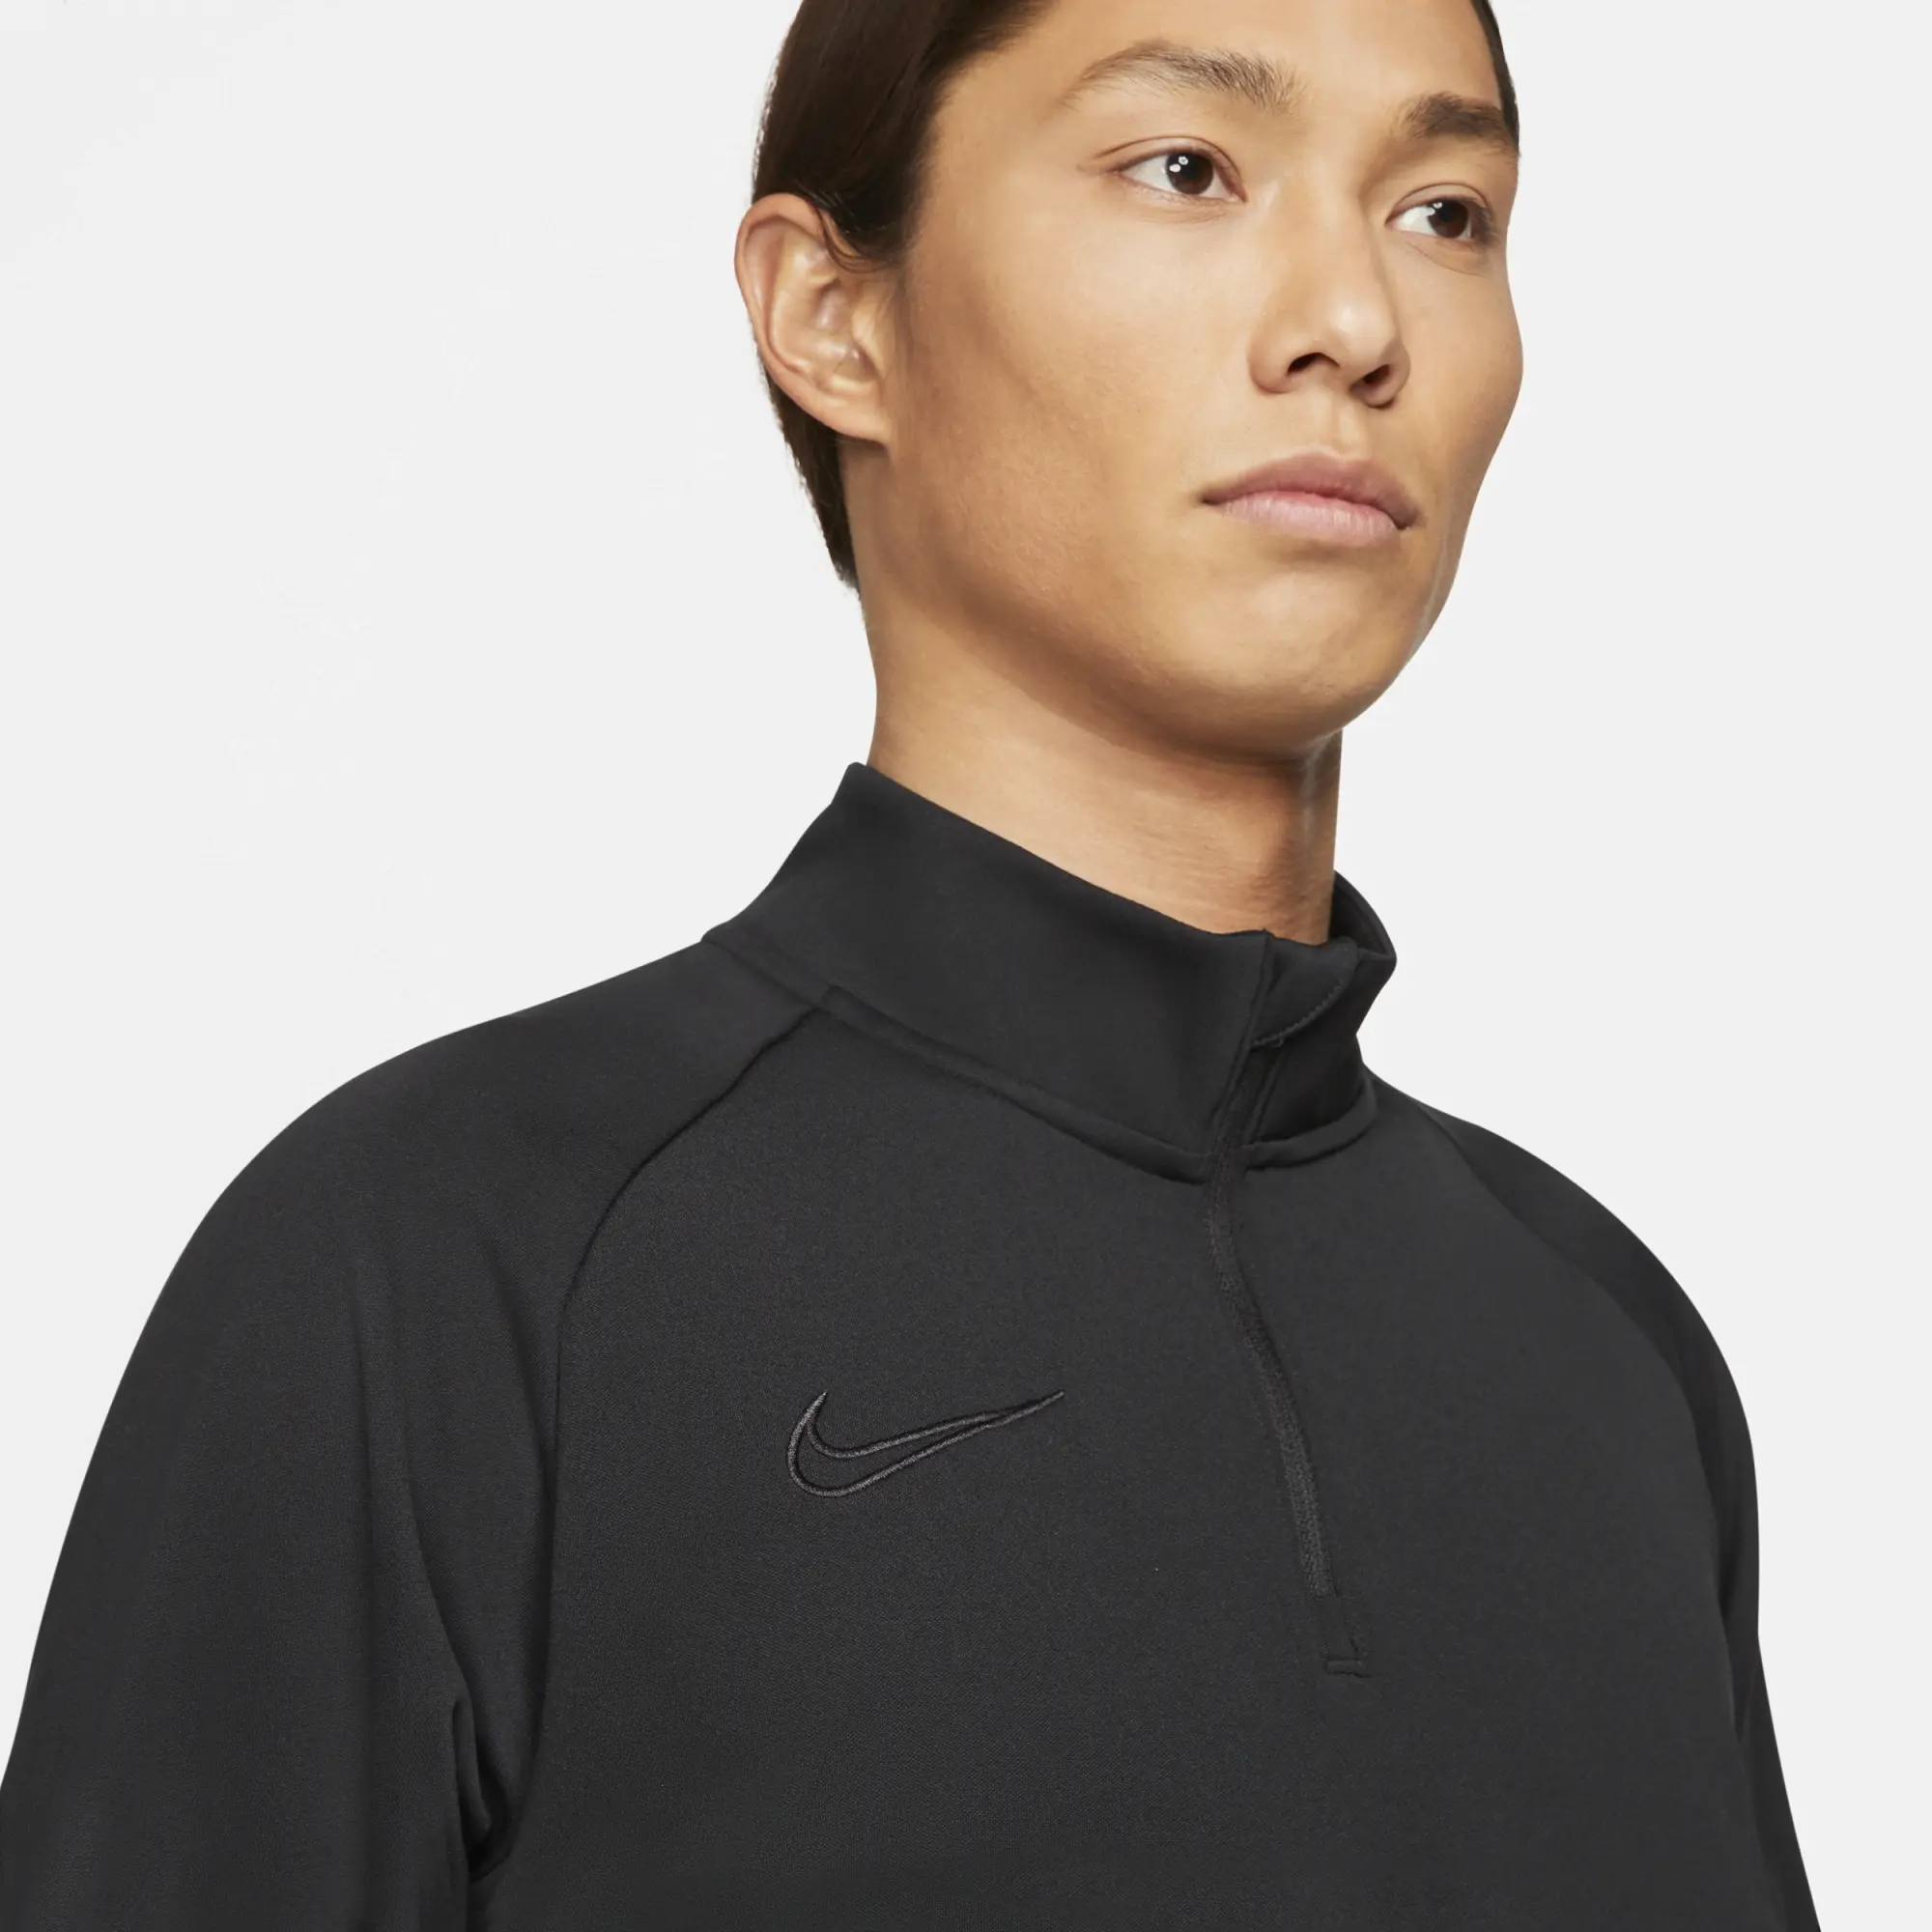 Nike FIT Academy Mens Soccer Drill Top